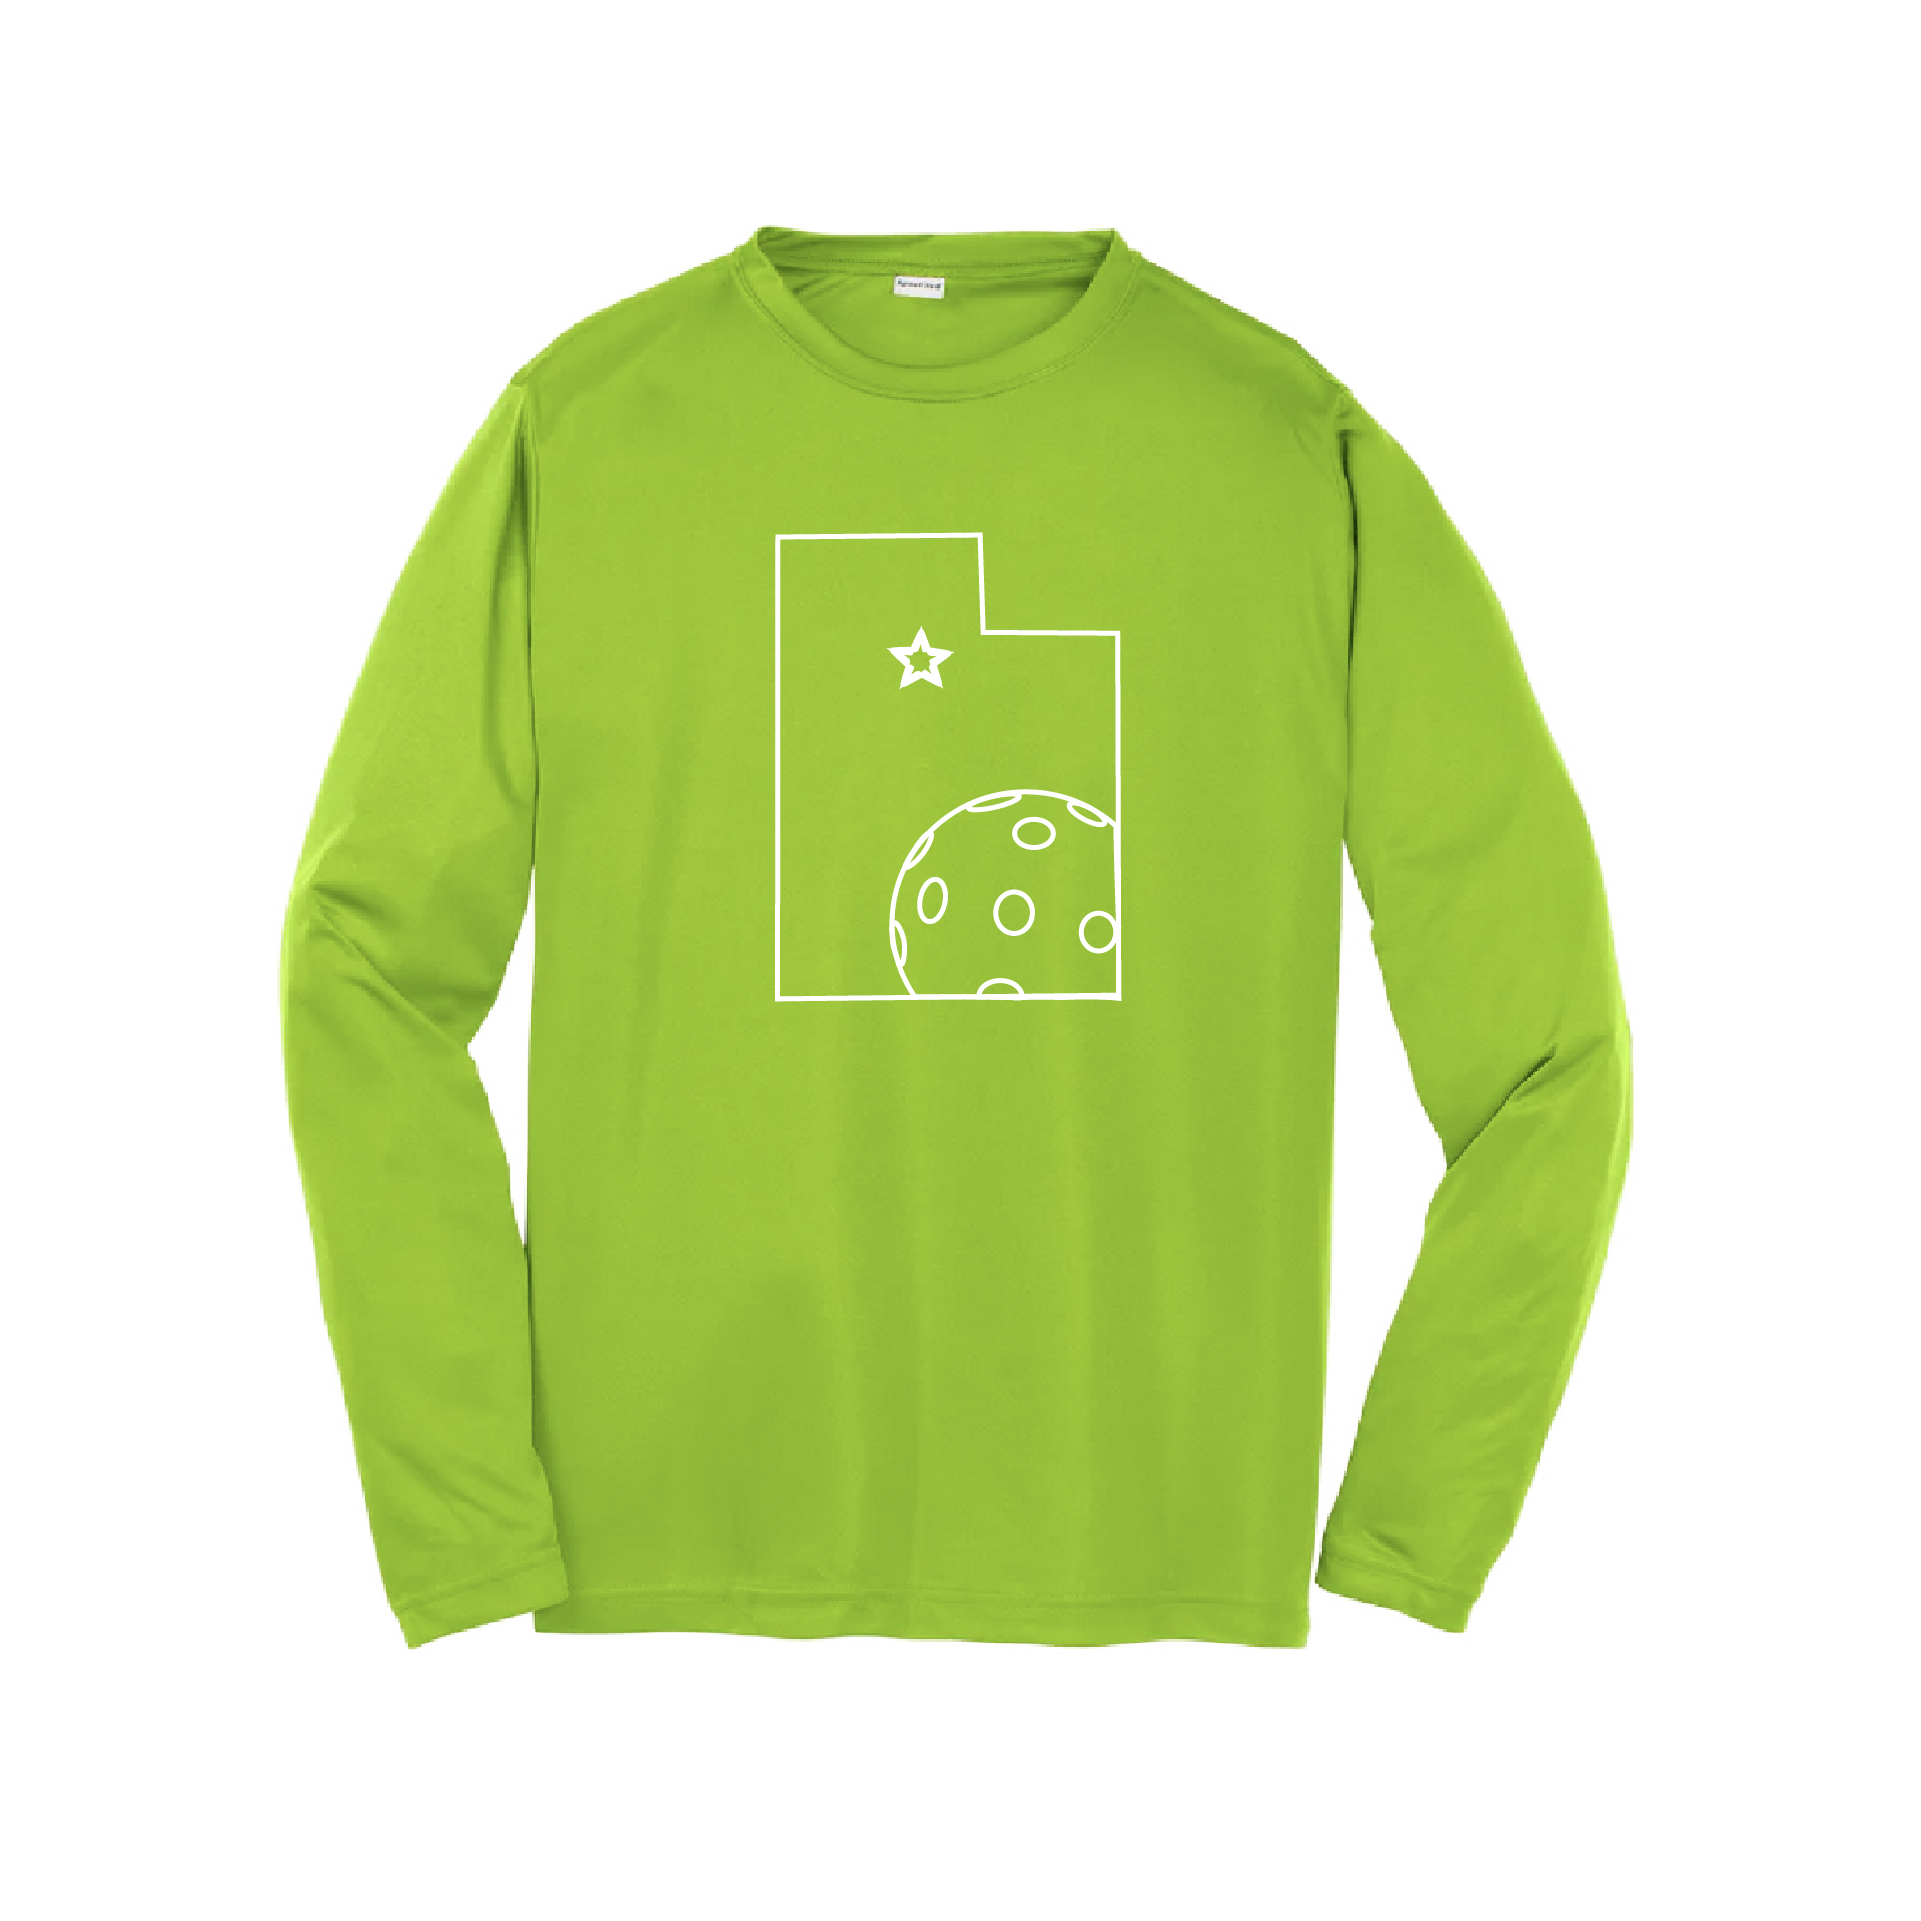 Pickleball Design: Utah with Star and Ball  Style:  Men's Long-Sleeve  Shirts are lightweight, roomy and highly breathable. These moisture-wicking shirts are designed for athletic performance. They feature PosiCharge technology to lock in color and prevent logos from fading. Removable tag and set-in sleeves for comfort.